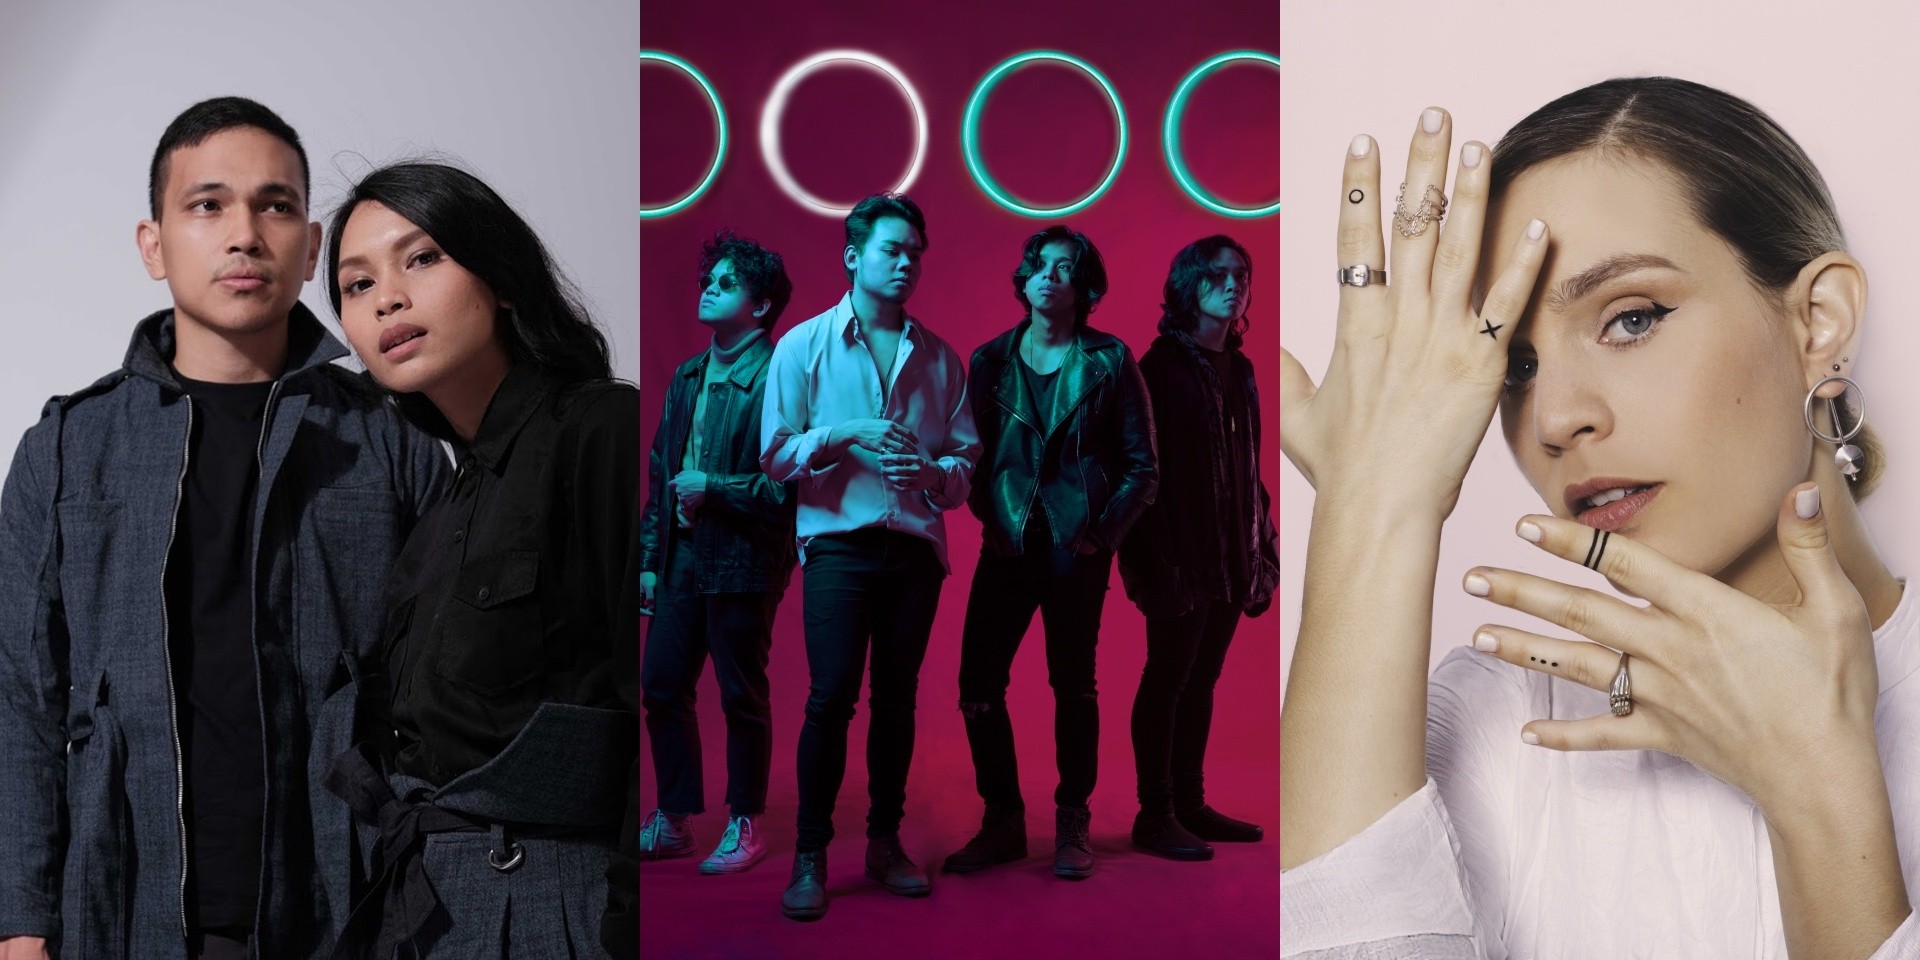 Get to know three artists performing at the Bandwagon Stage at Music Matters Live